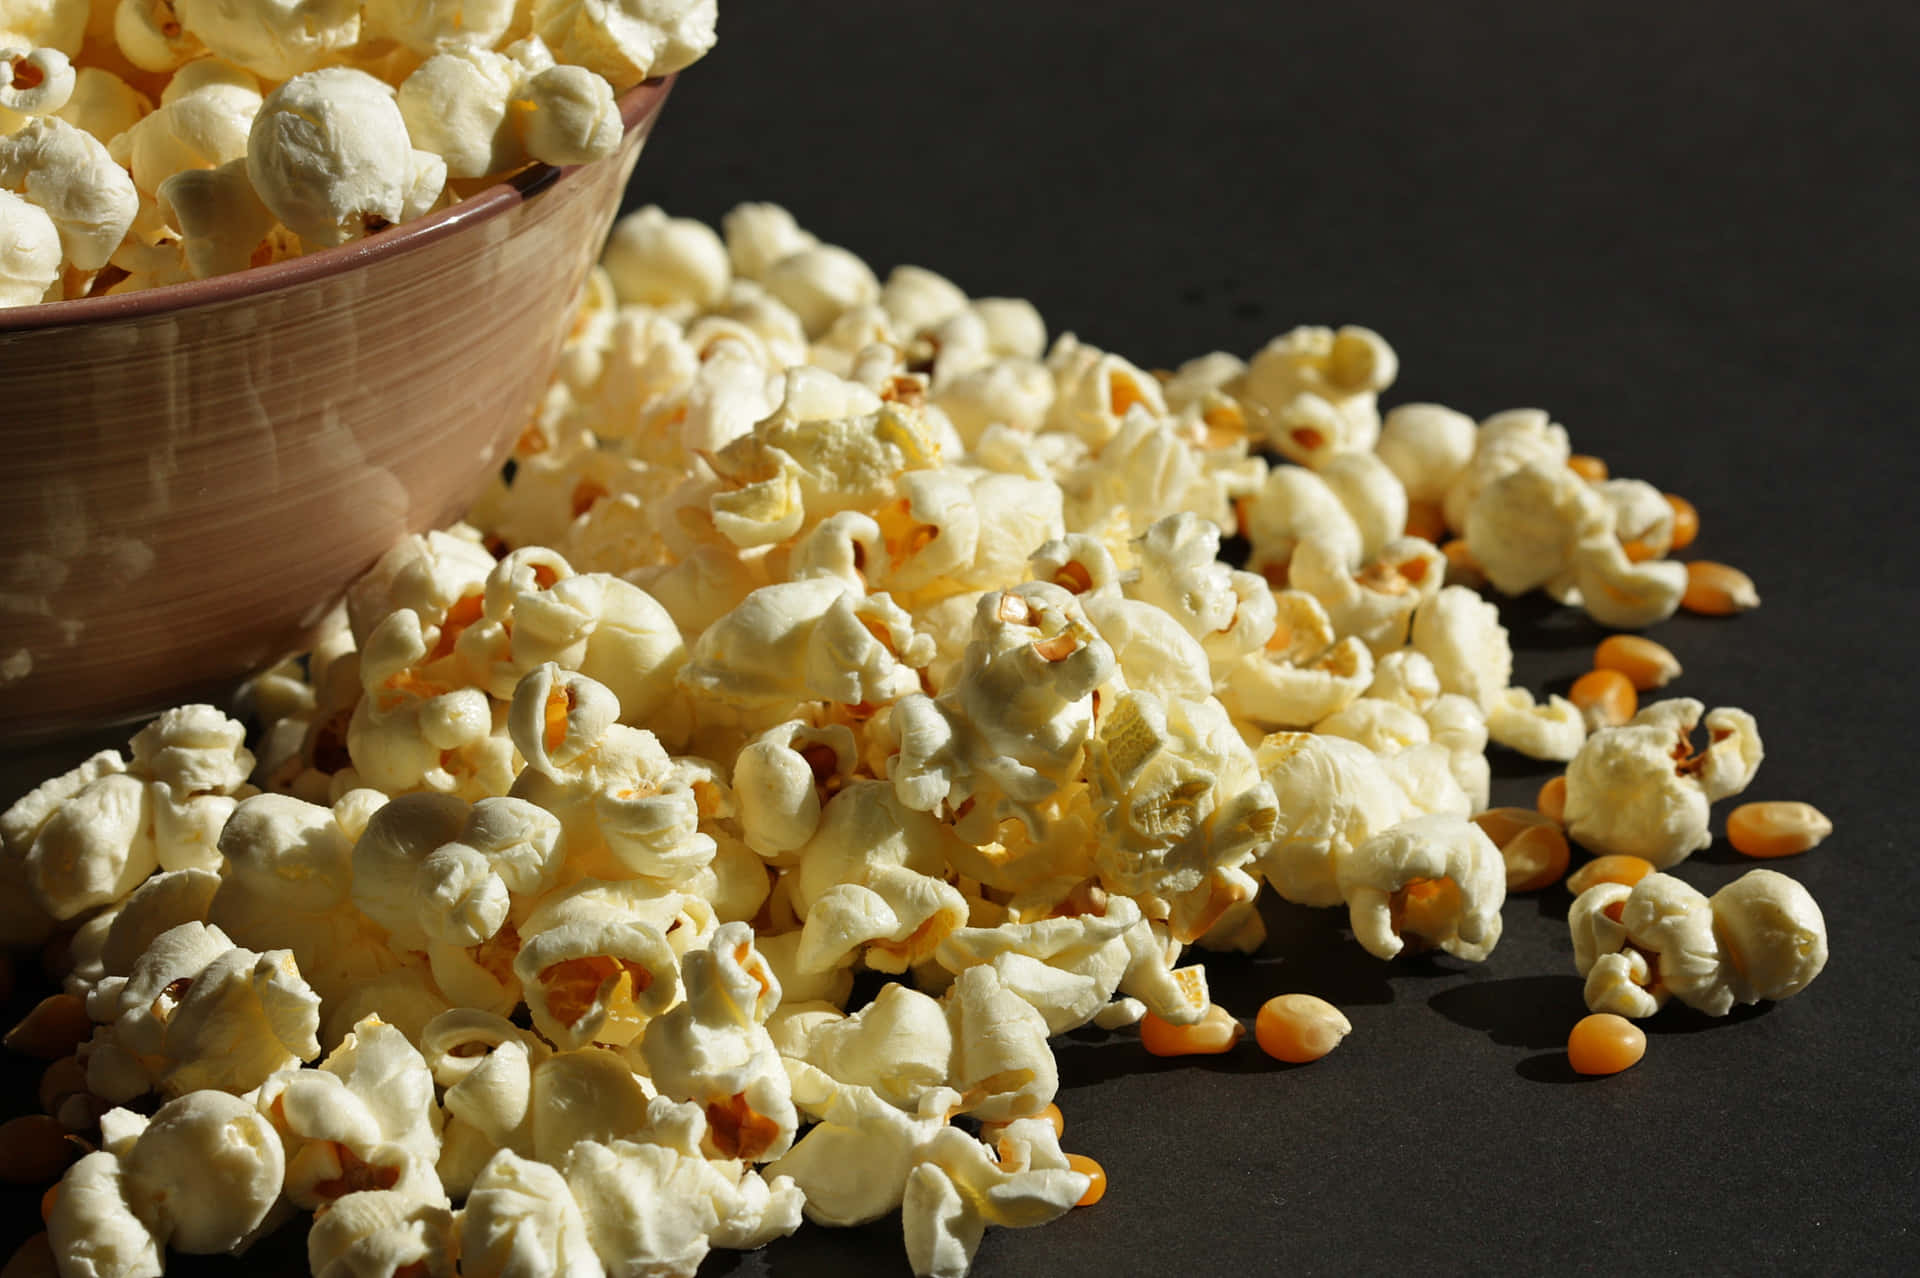 "The Perfect Snack To Complement Any Movie: Popcorn!"